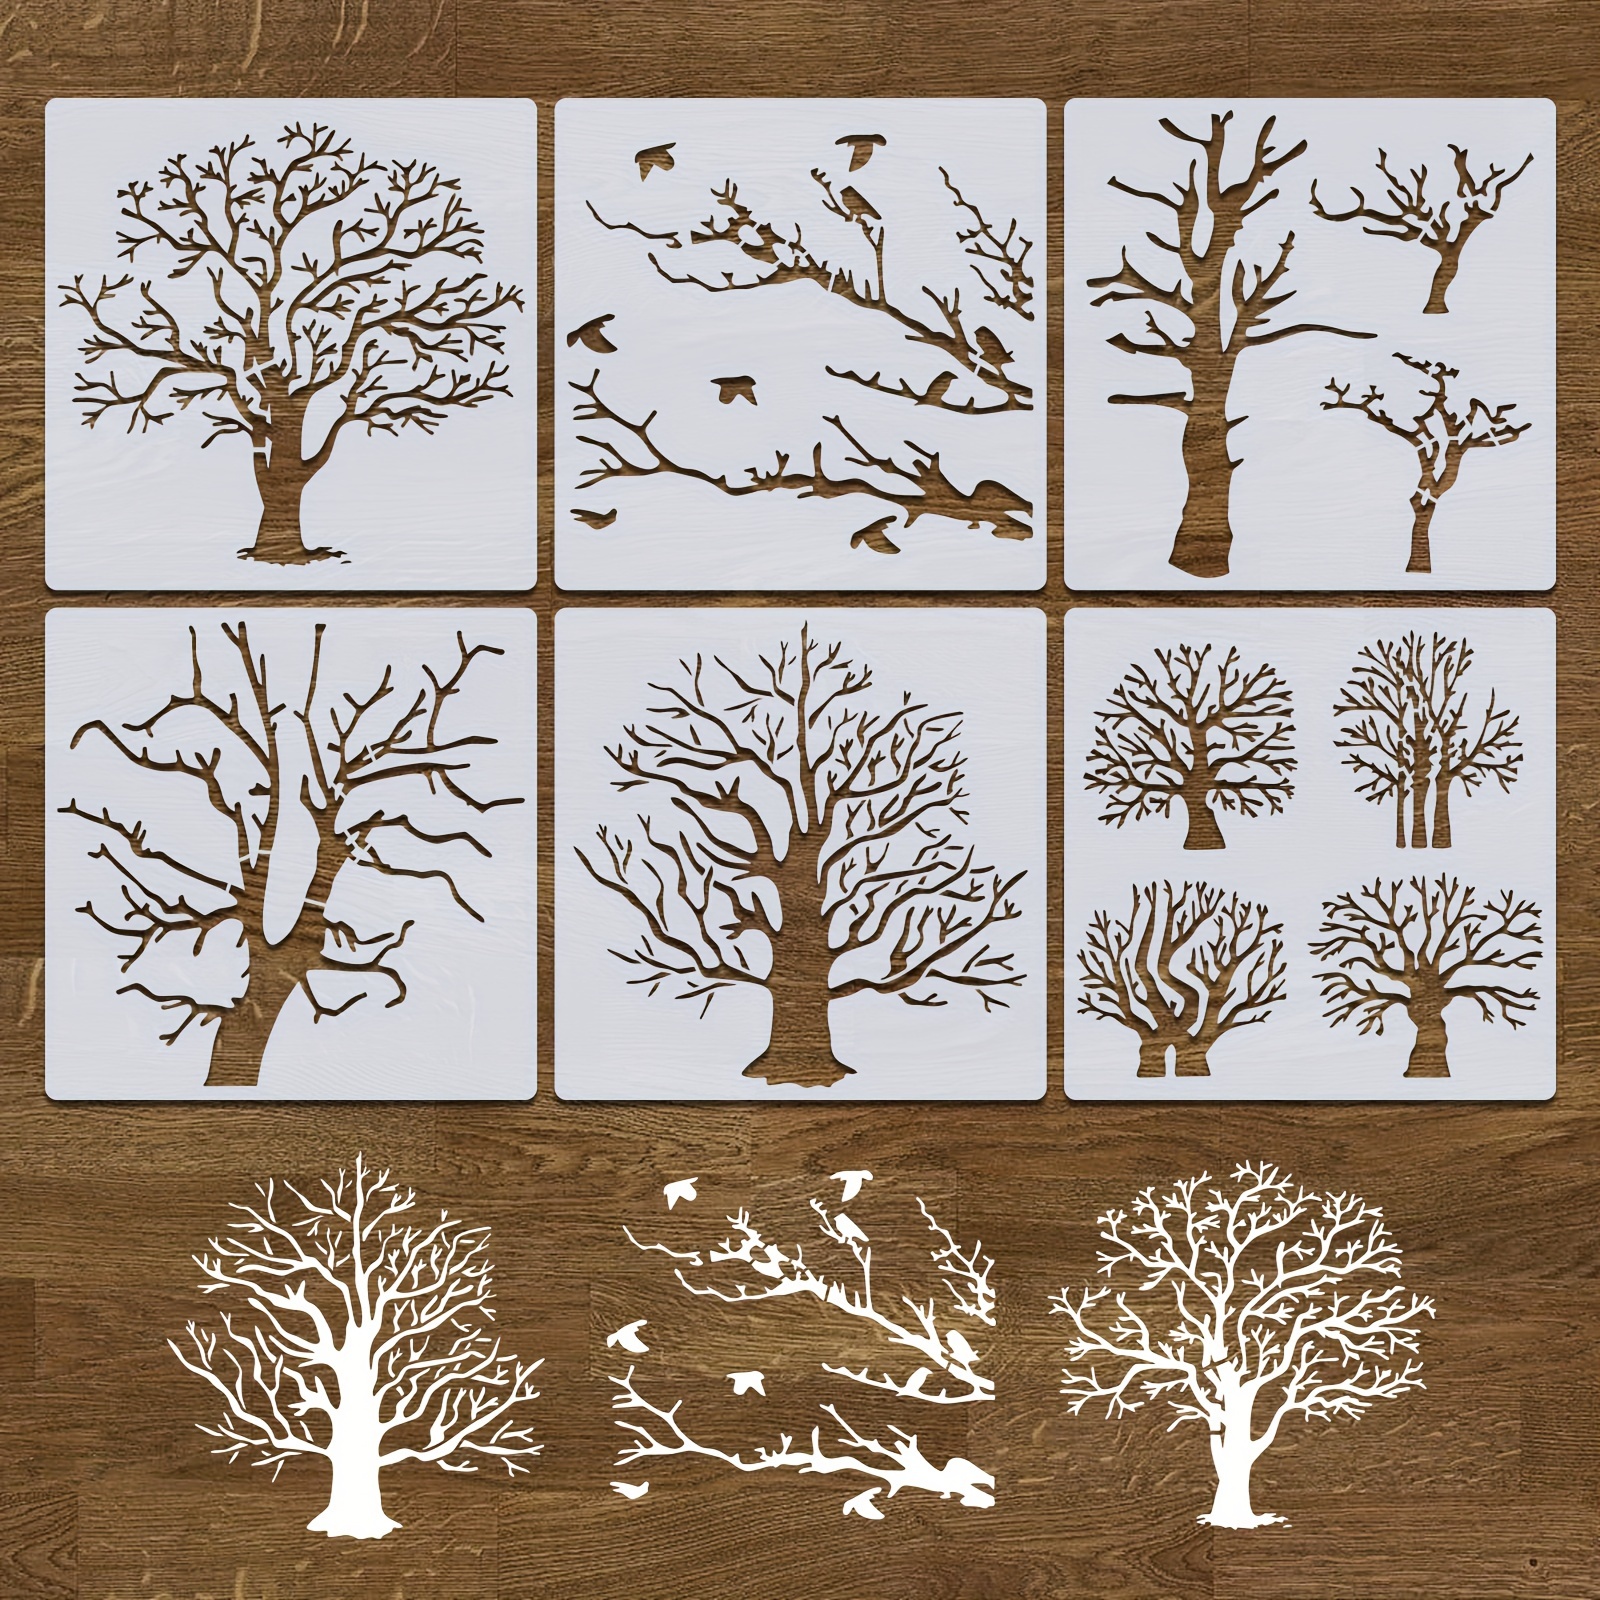 

6pcs Tree Stencils 7.9x7.9 Inch Branches, Bird Stencils, Reusable Plastic Stencils For Painting On Canvas Wood Wall Floor Home Decor